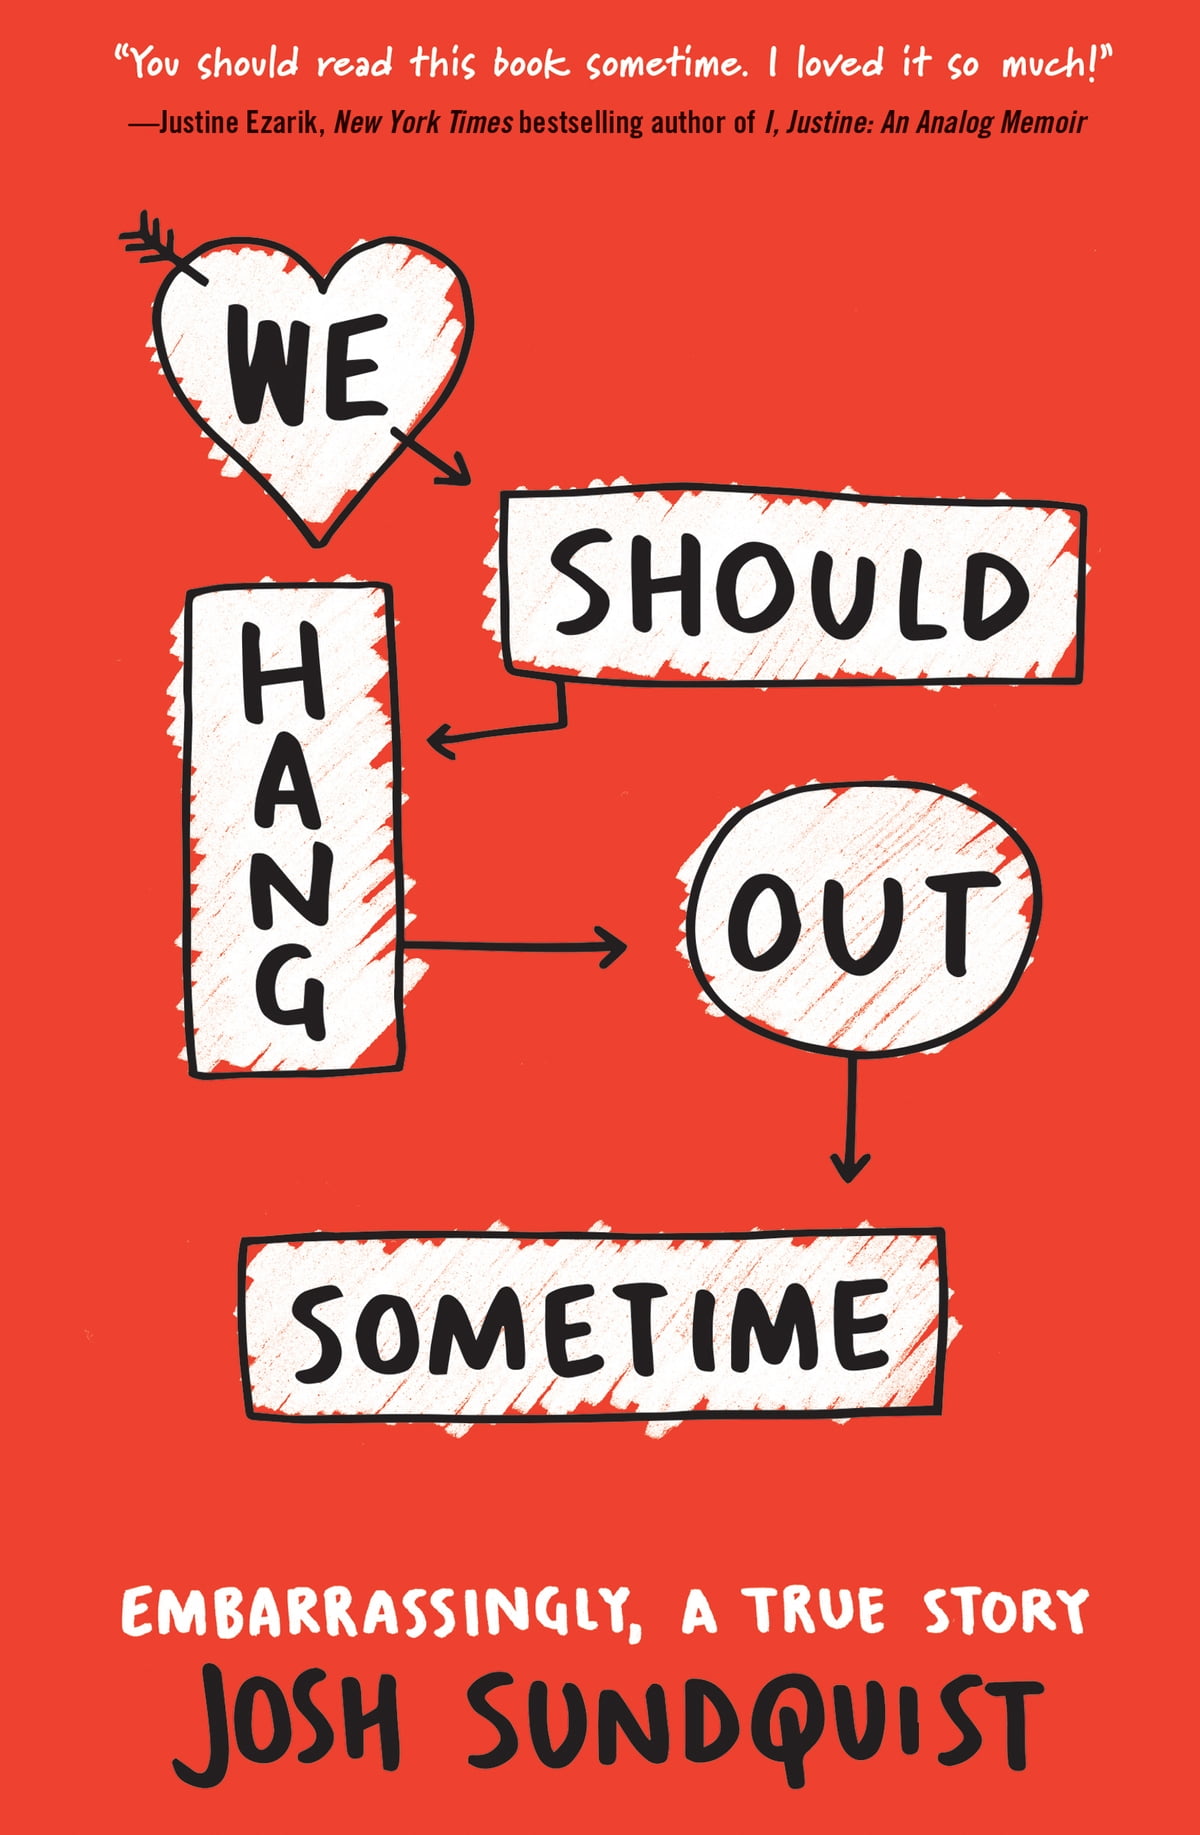 We Should Hang Out Sometime by Josh Sundquist - middle school books